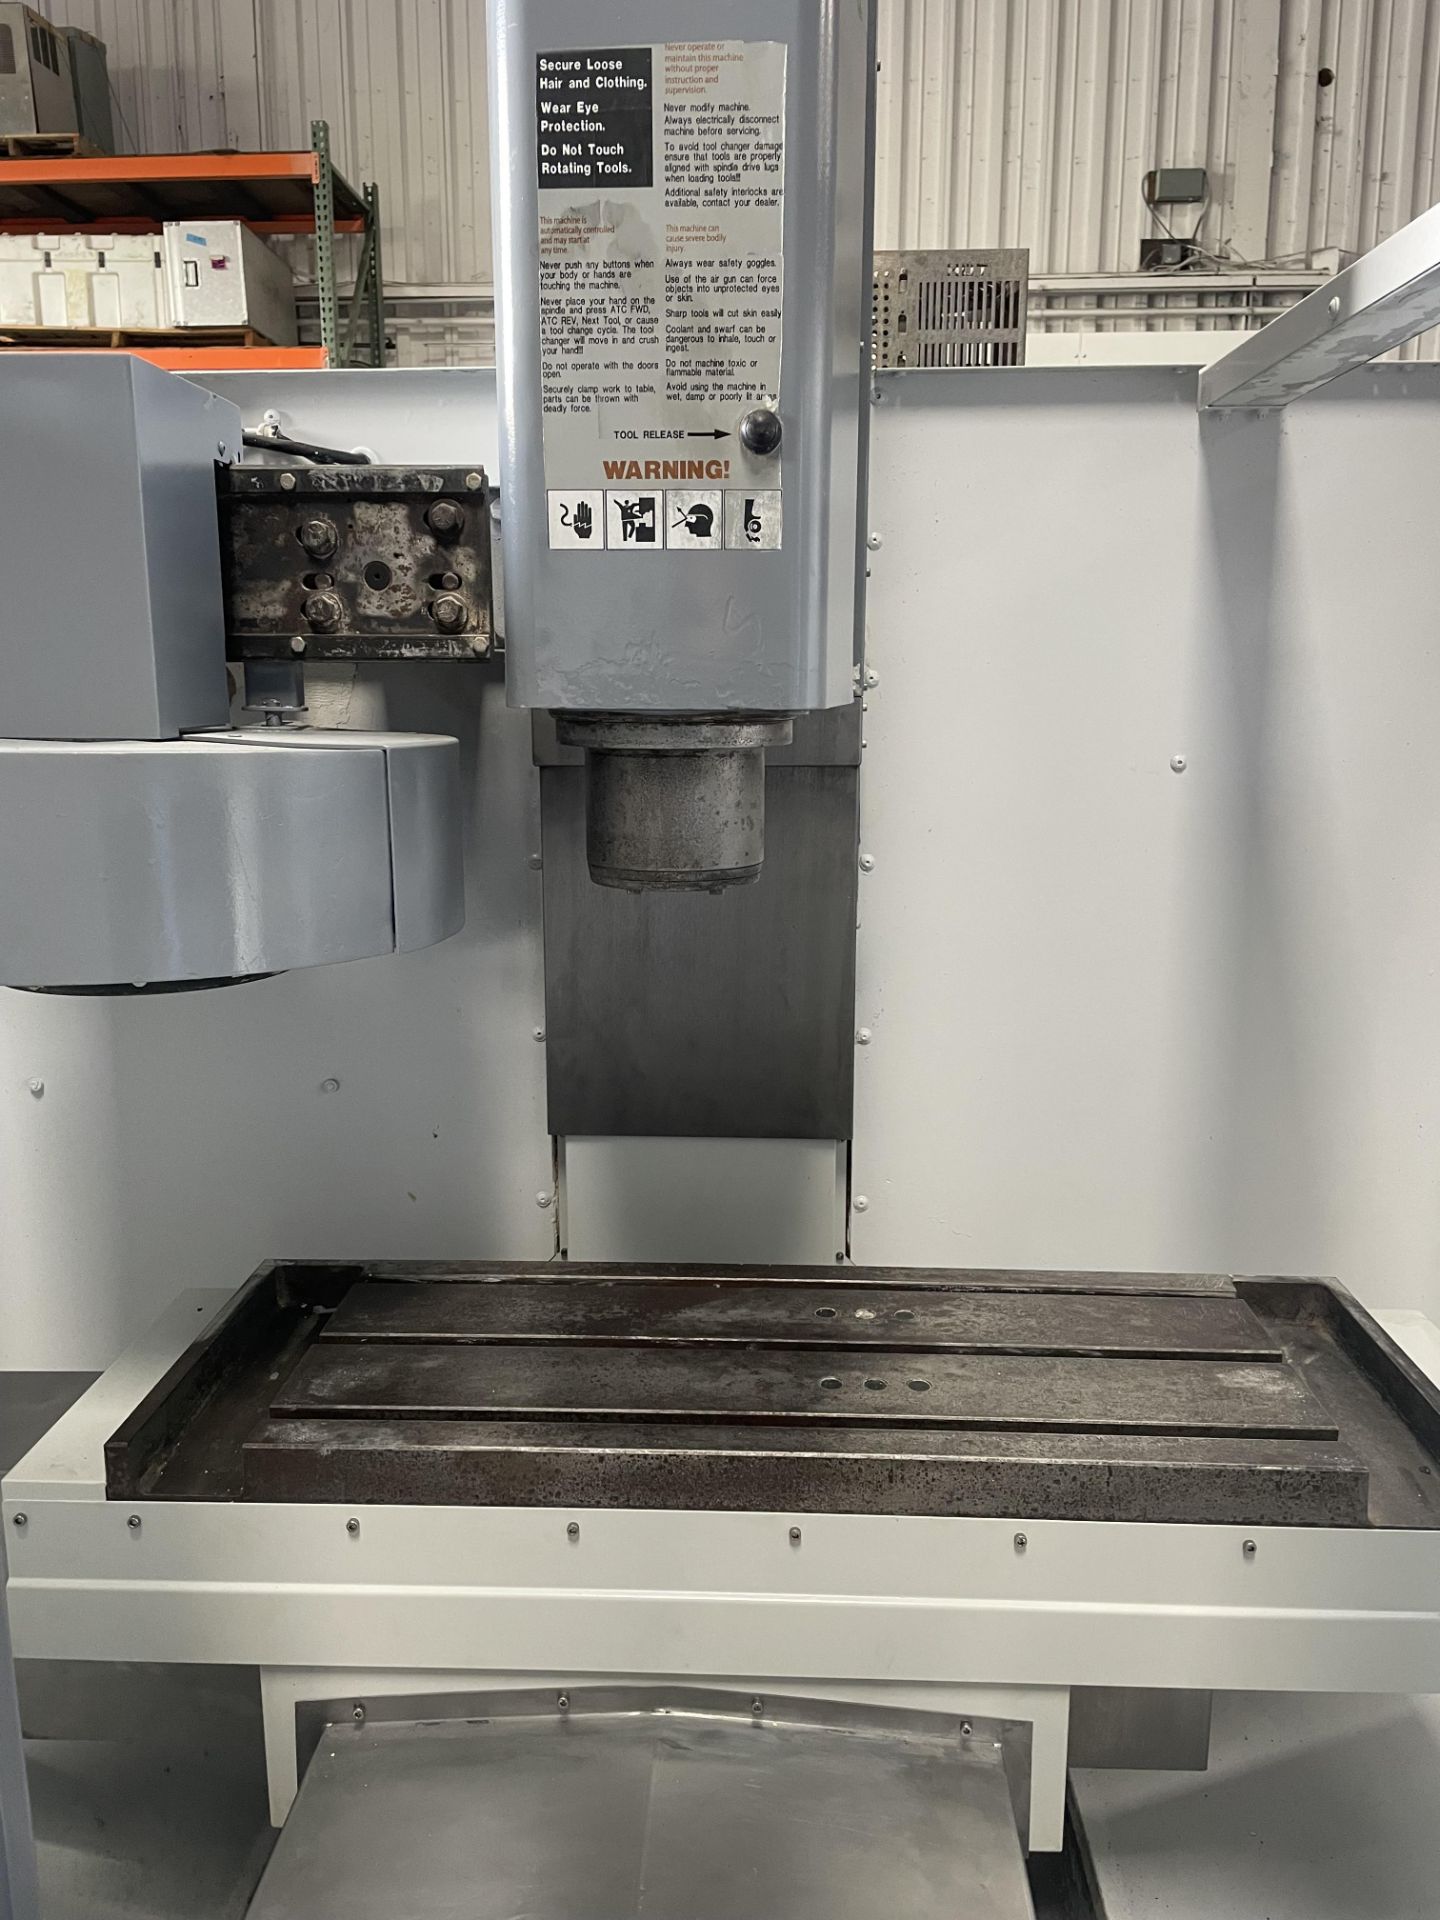 2010 HAAS MINI MILL CNC Vertical Machining Center - Image 5 of 9